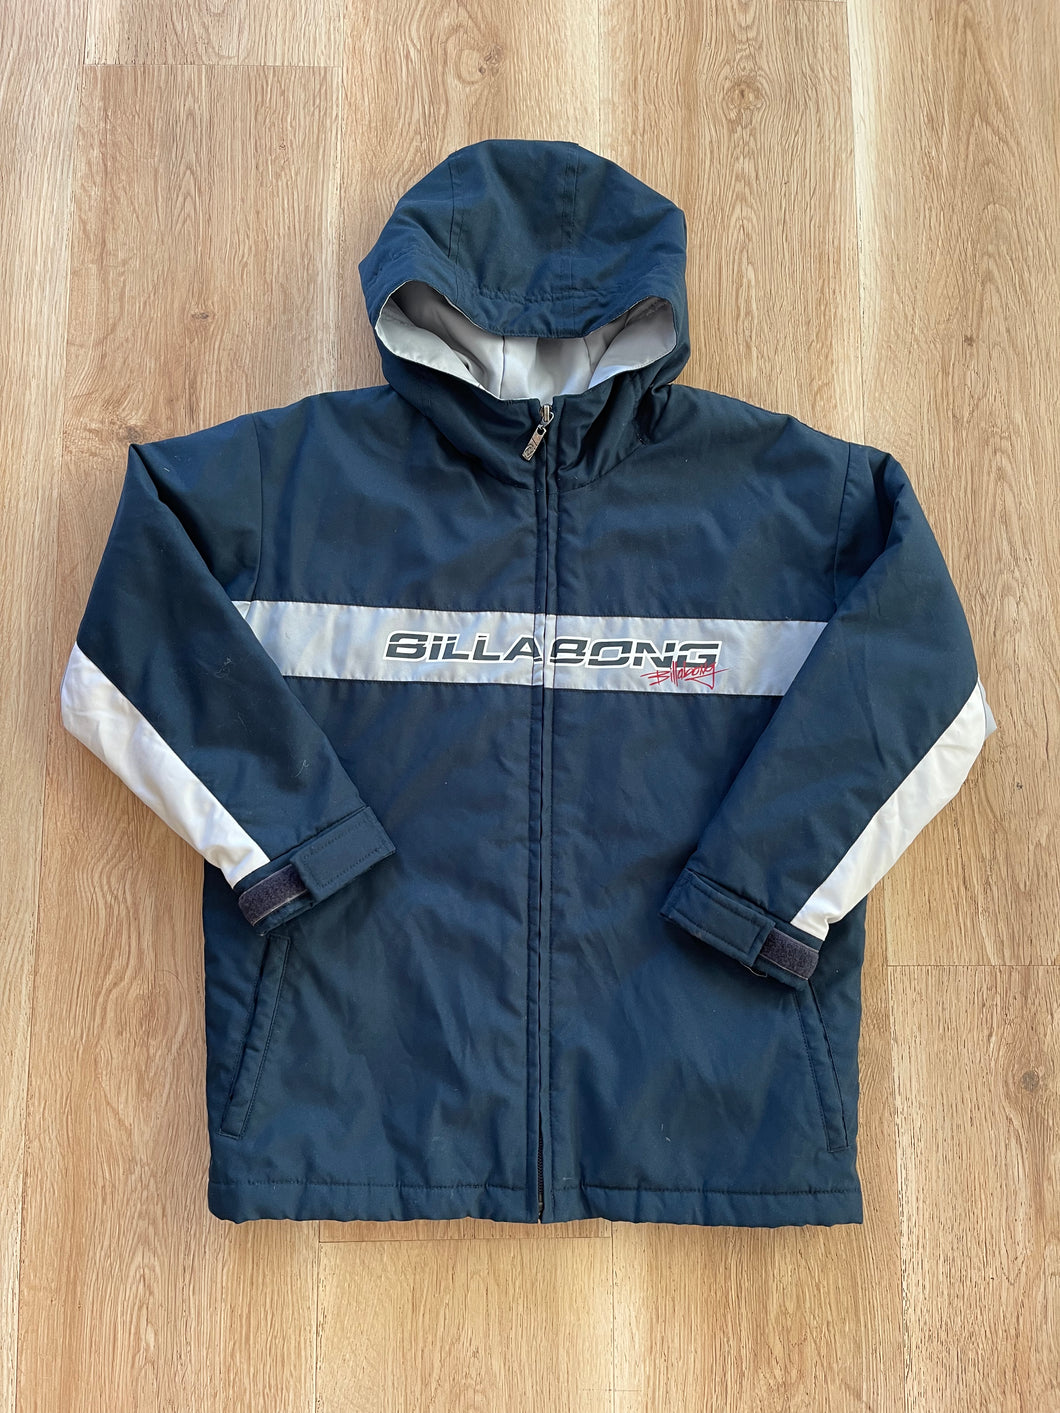 Vintage Billabong Spellout Jacket (Youth 8)